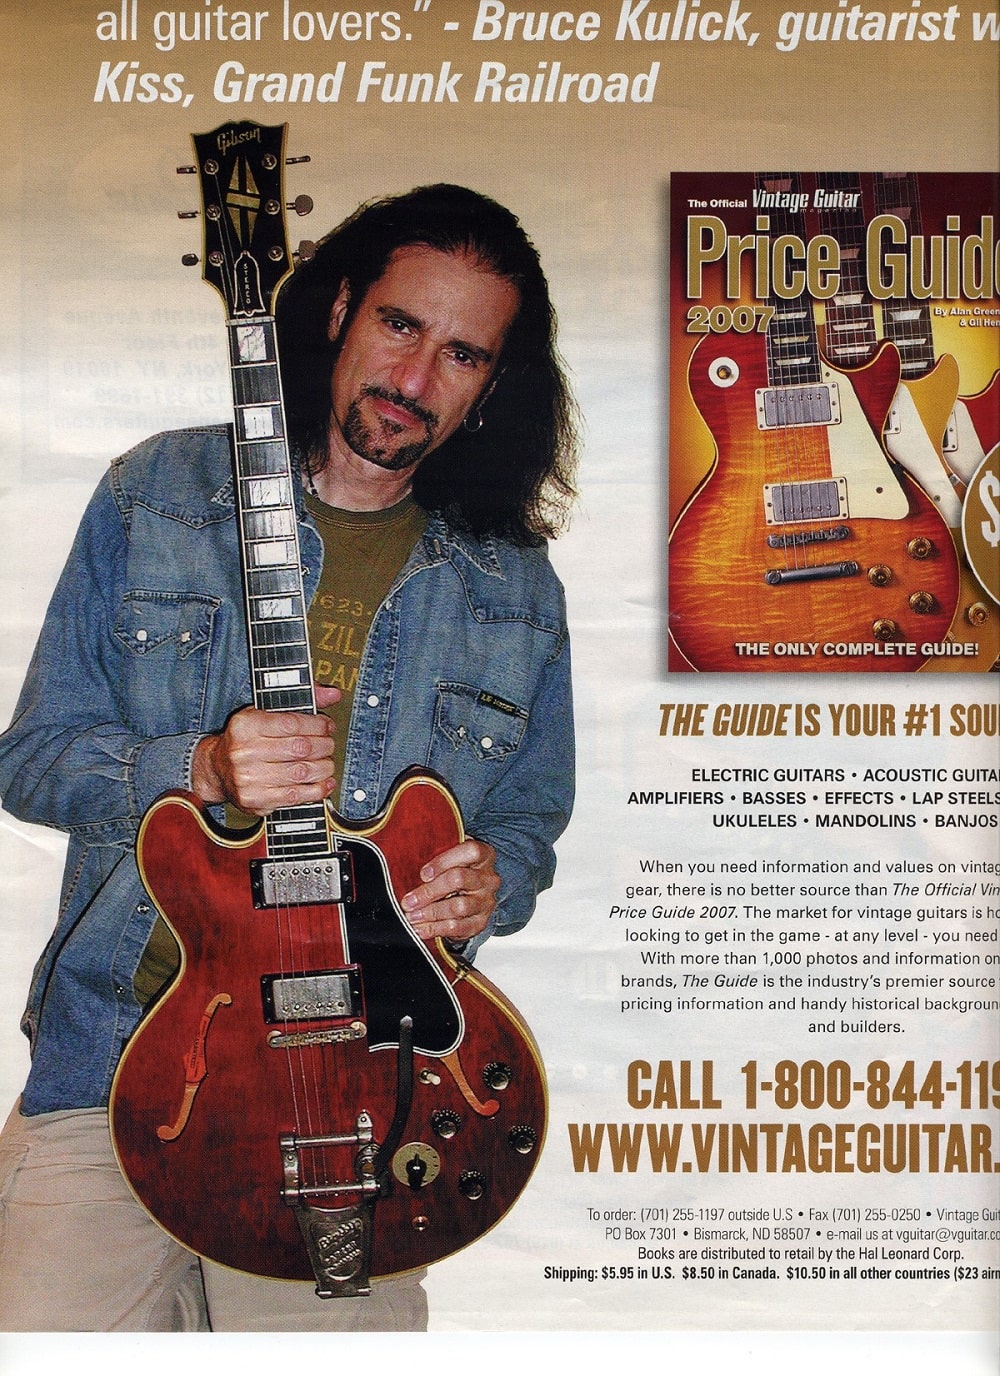 Bruce Kulick with his 1960 ES355 in cherry red